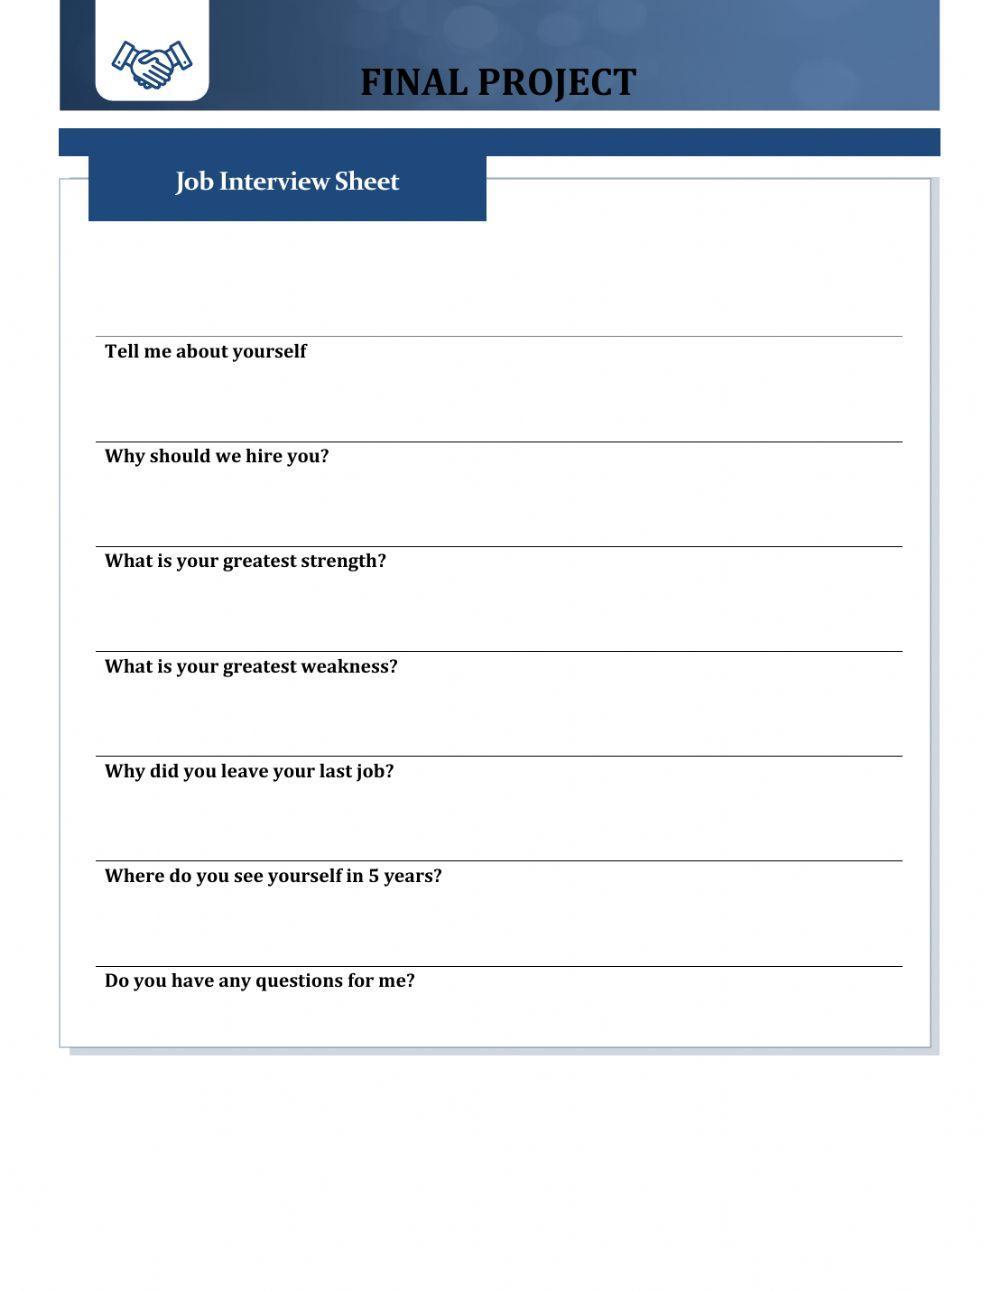 Internet Project: Search and Interview for a Job